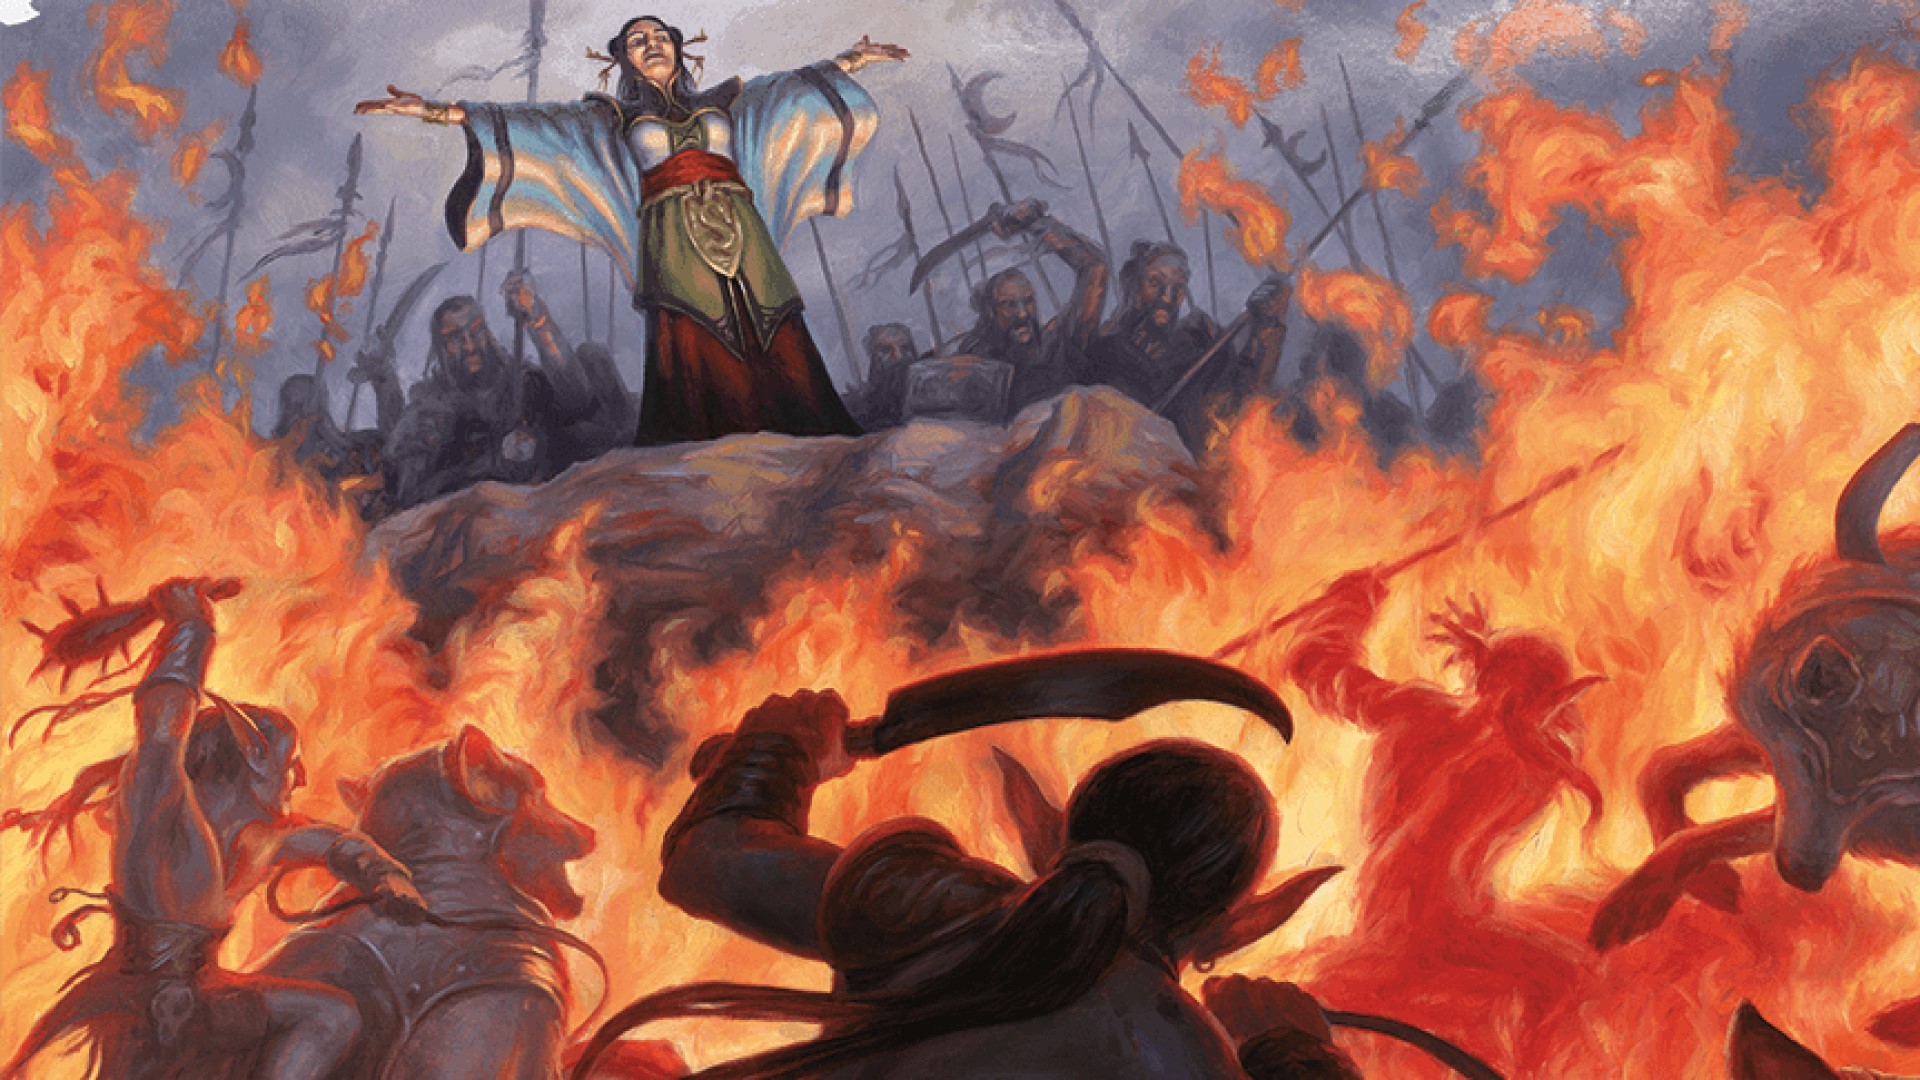 DnD Green Flame Blade 5e - Wizards of the Caost art of a woman standing over enemies engulfed in flames